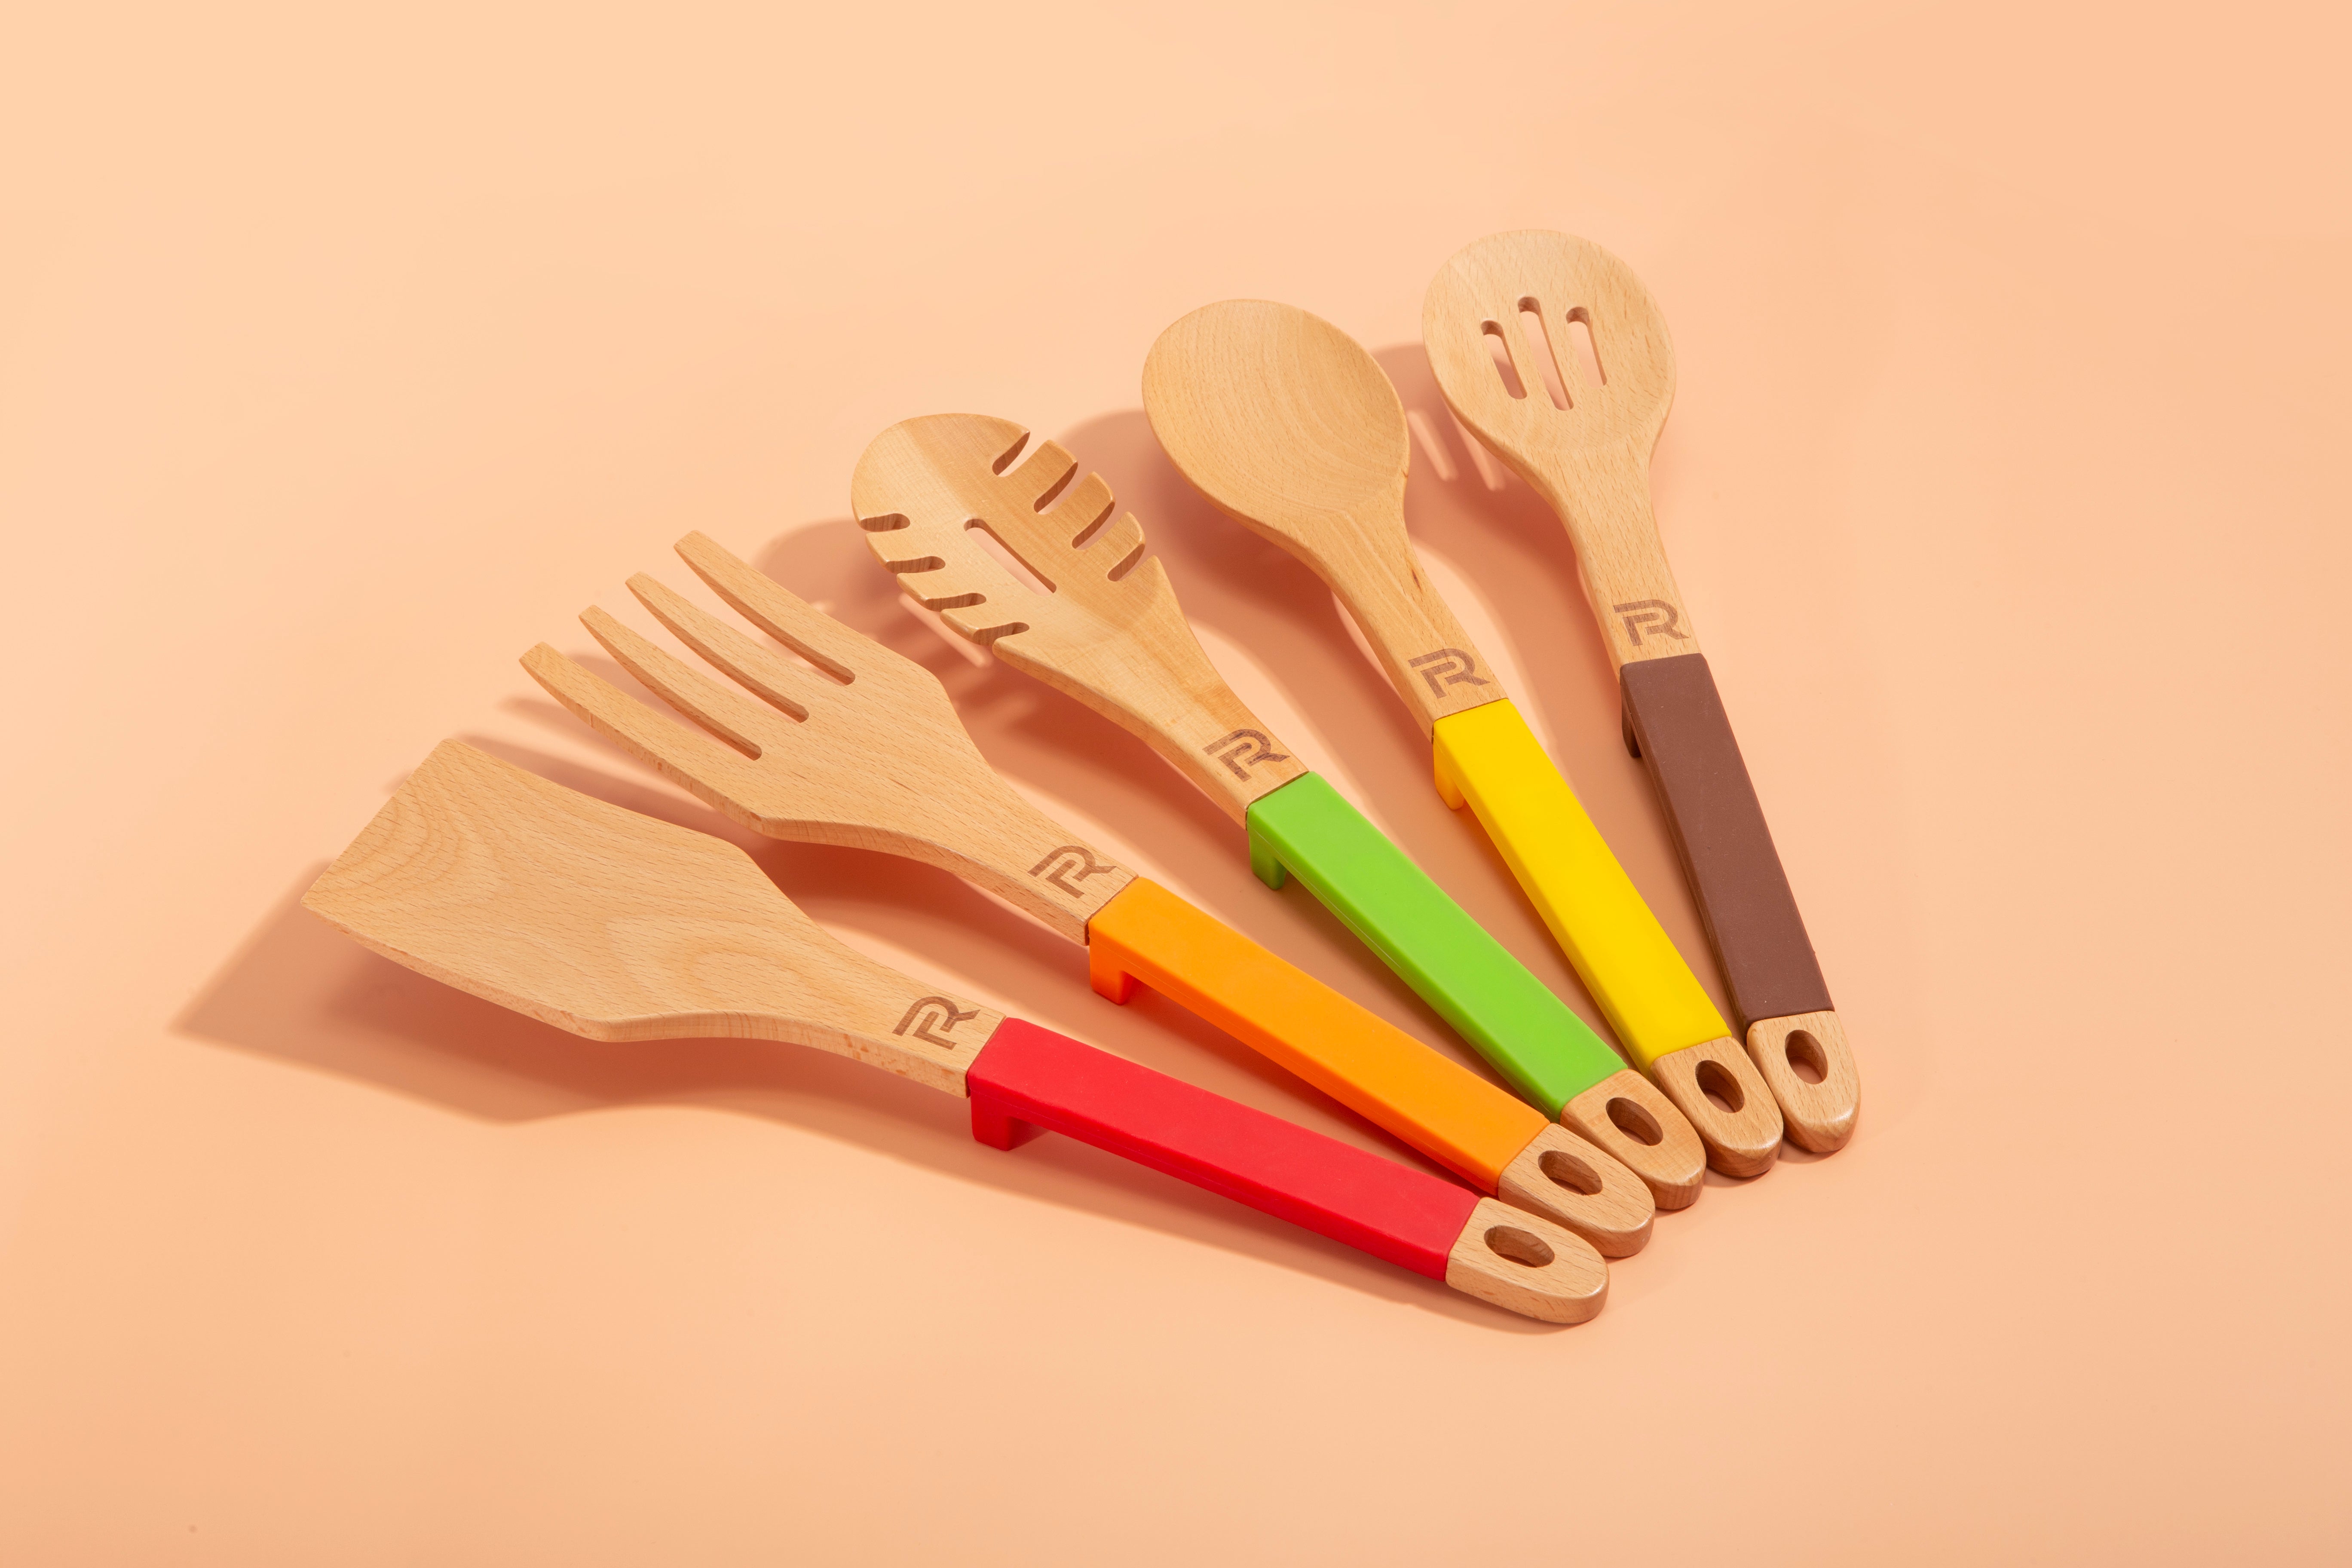 Riviera Best Friend Birthday Gifts For Women Wooden Spoons For Cooking